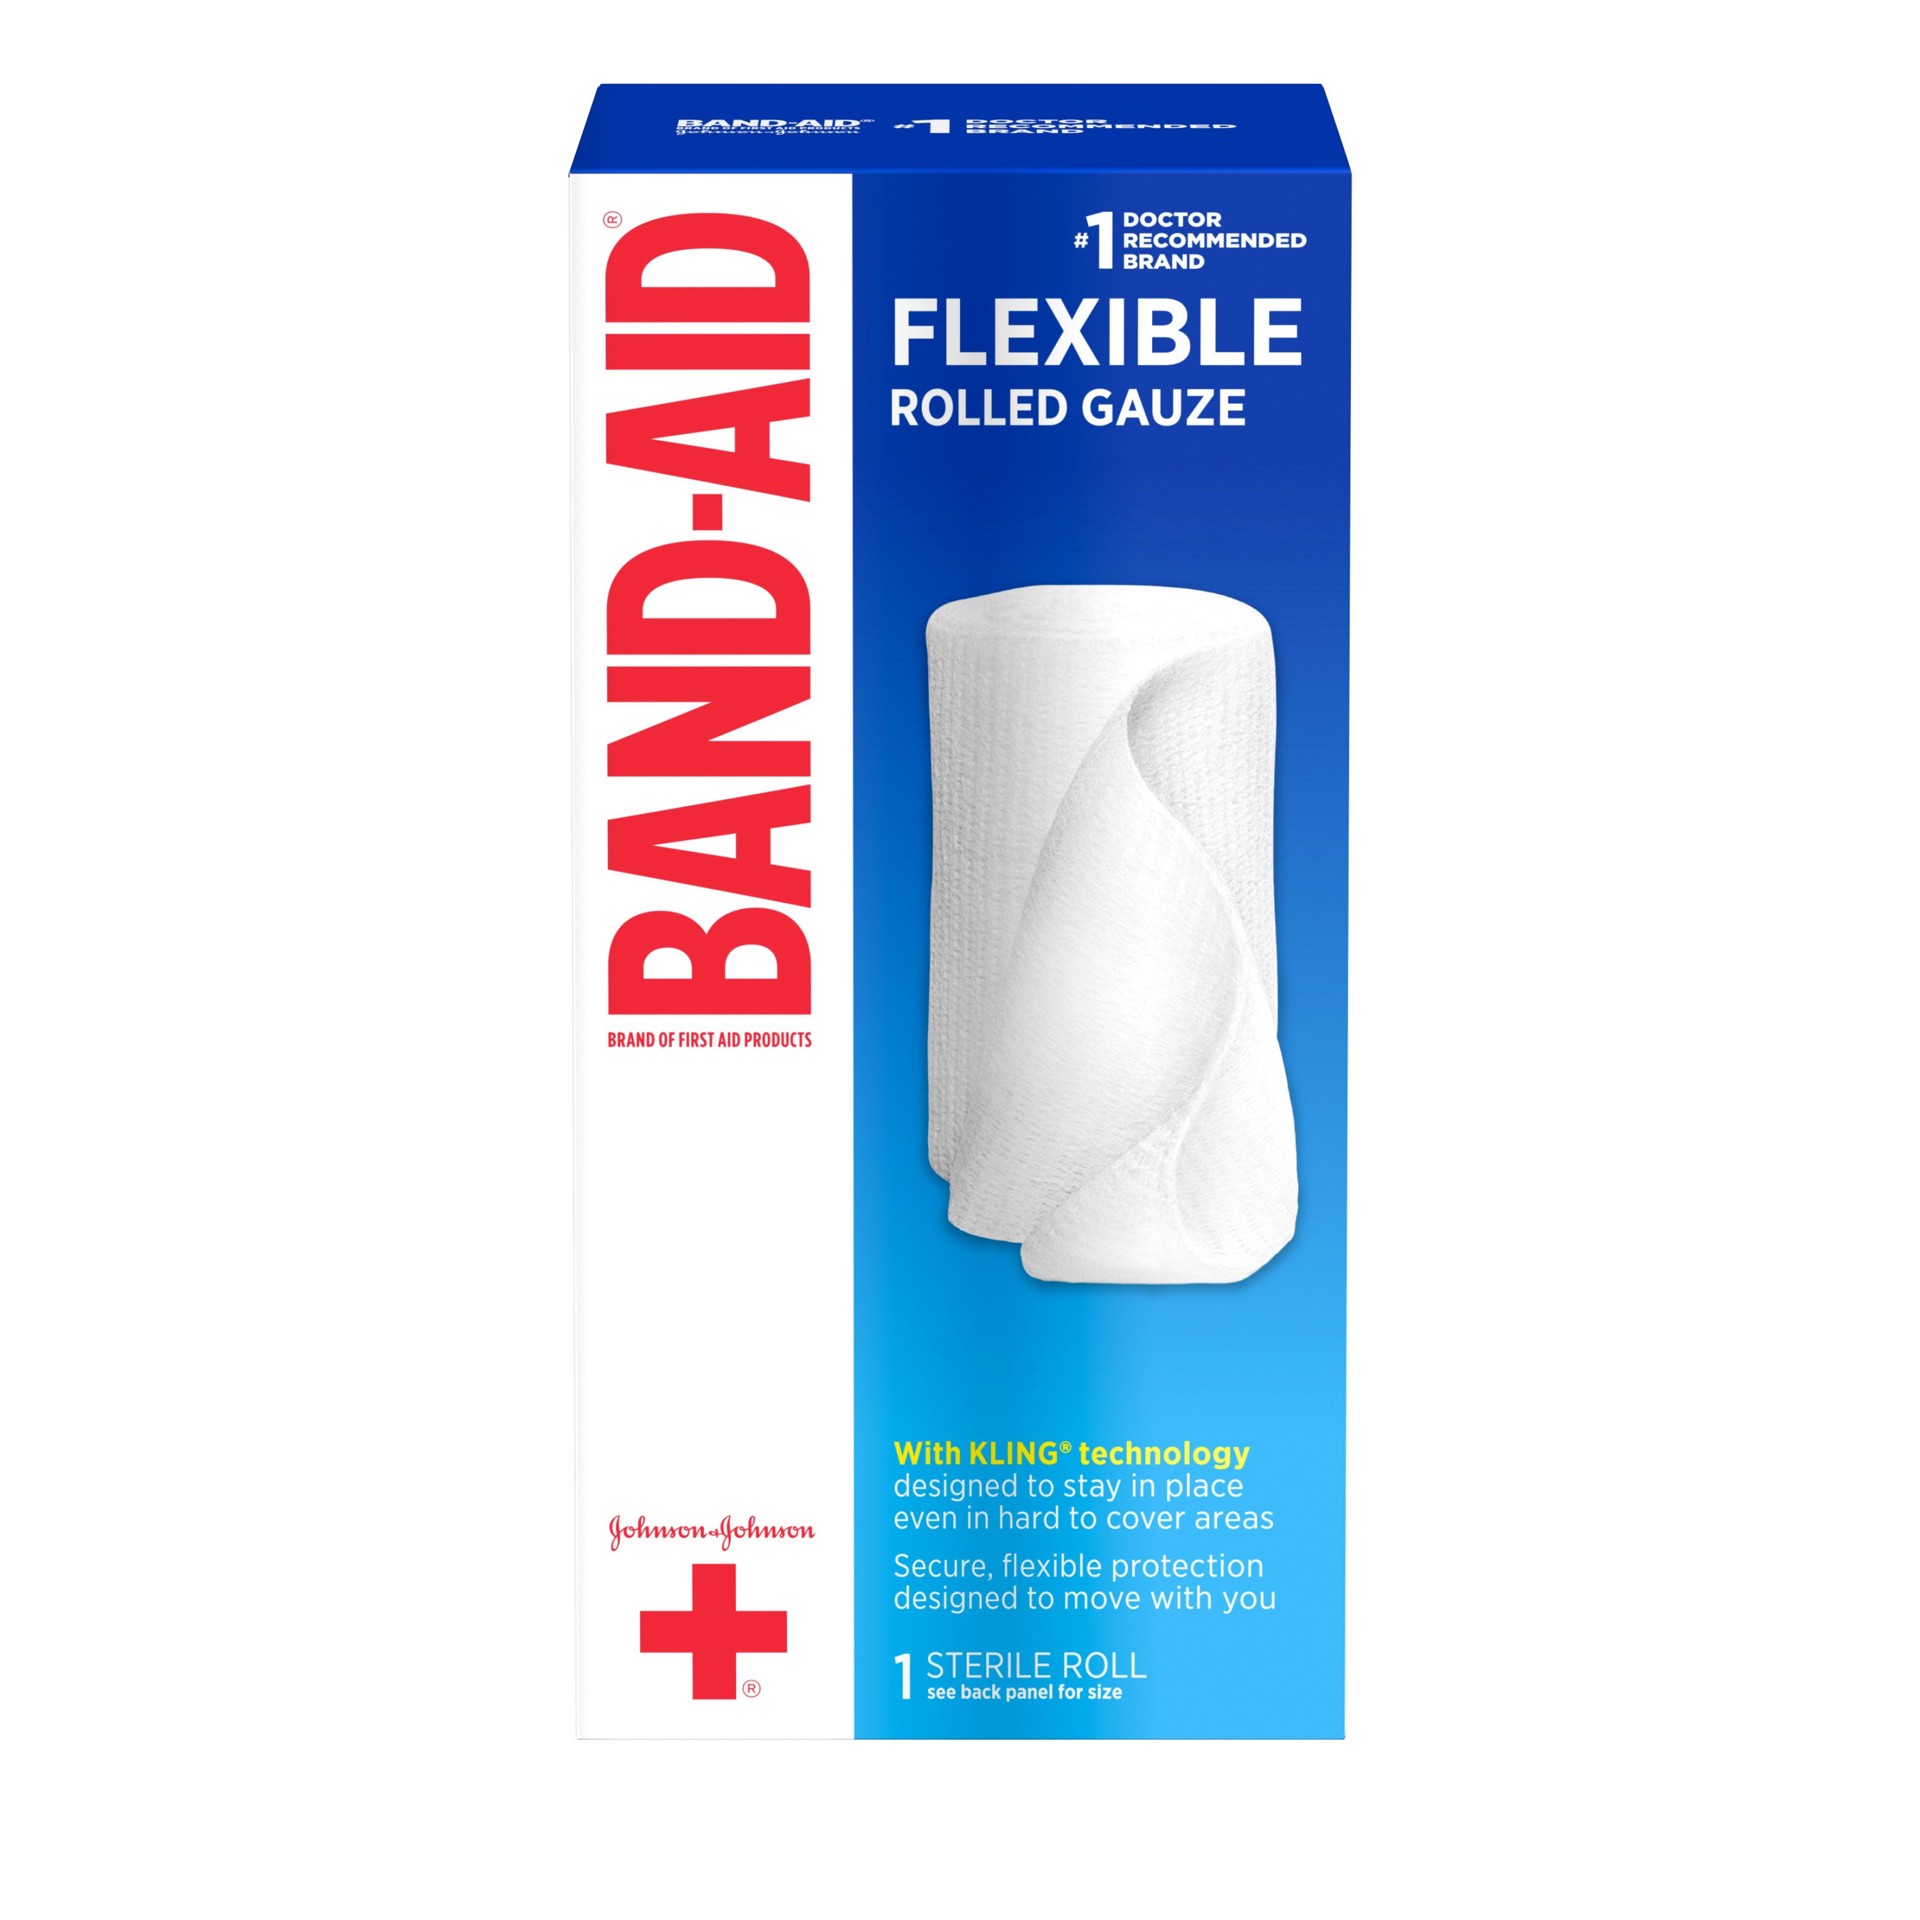 slide 1 of 15, BAND-AID Band Aid Brand of First Aid Products Flexible Rolled Gauze Dressing for Minor Wound Care, soft Padding and Instant Absorption, 4 Inches by 2.5 Yards, 1 ct